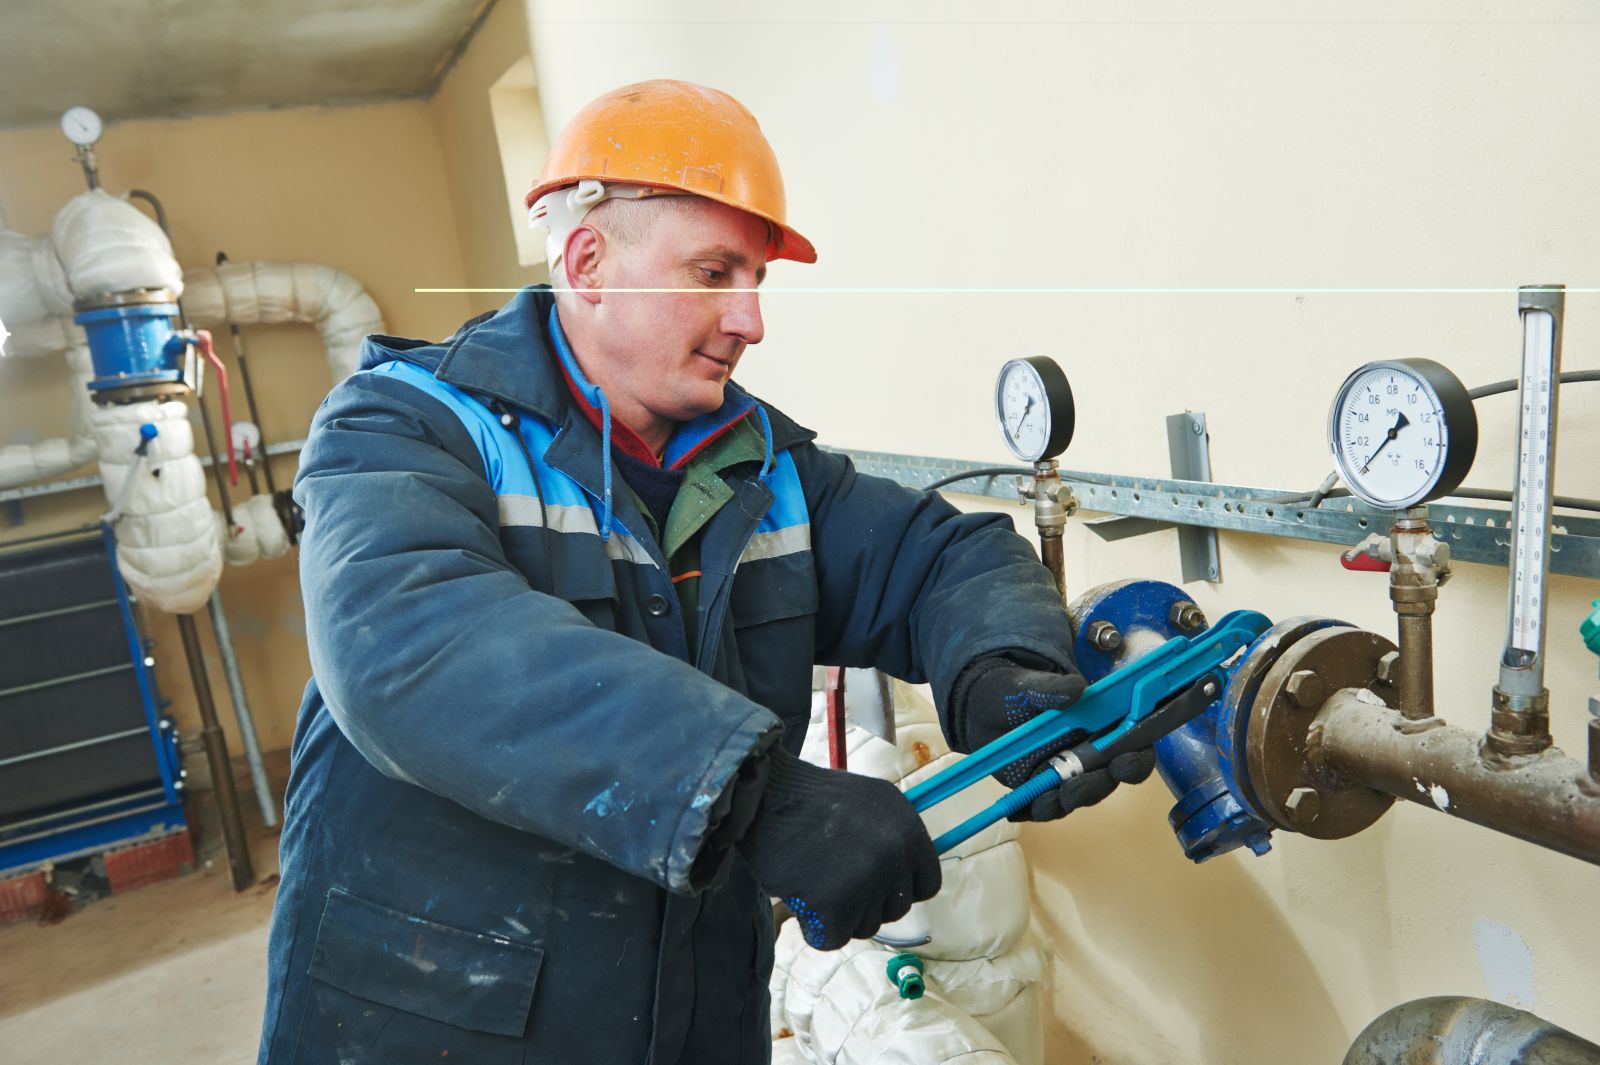 How to Improve Boiler Efficiency and Performance